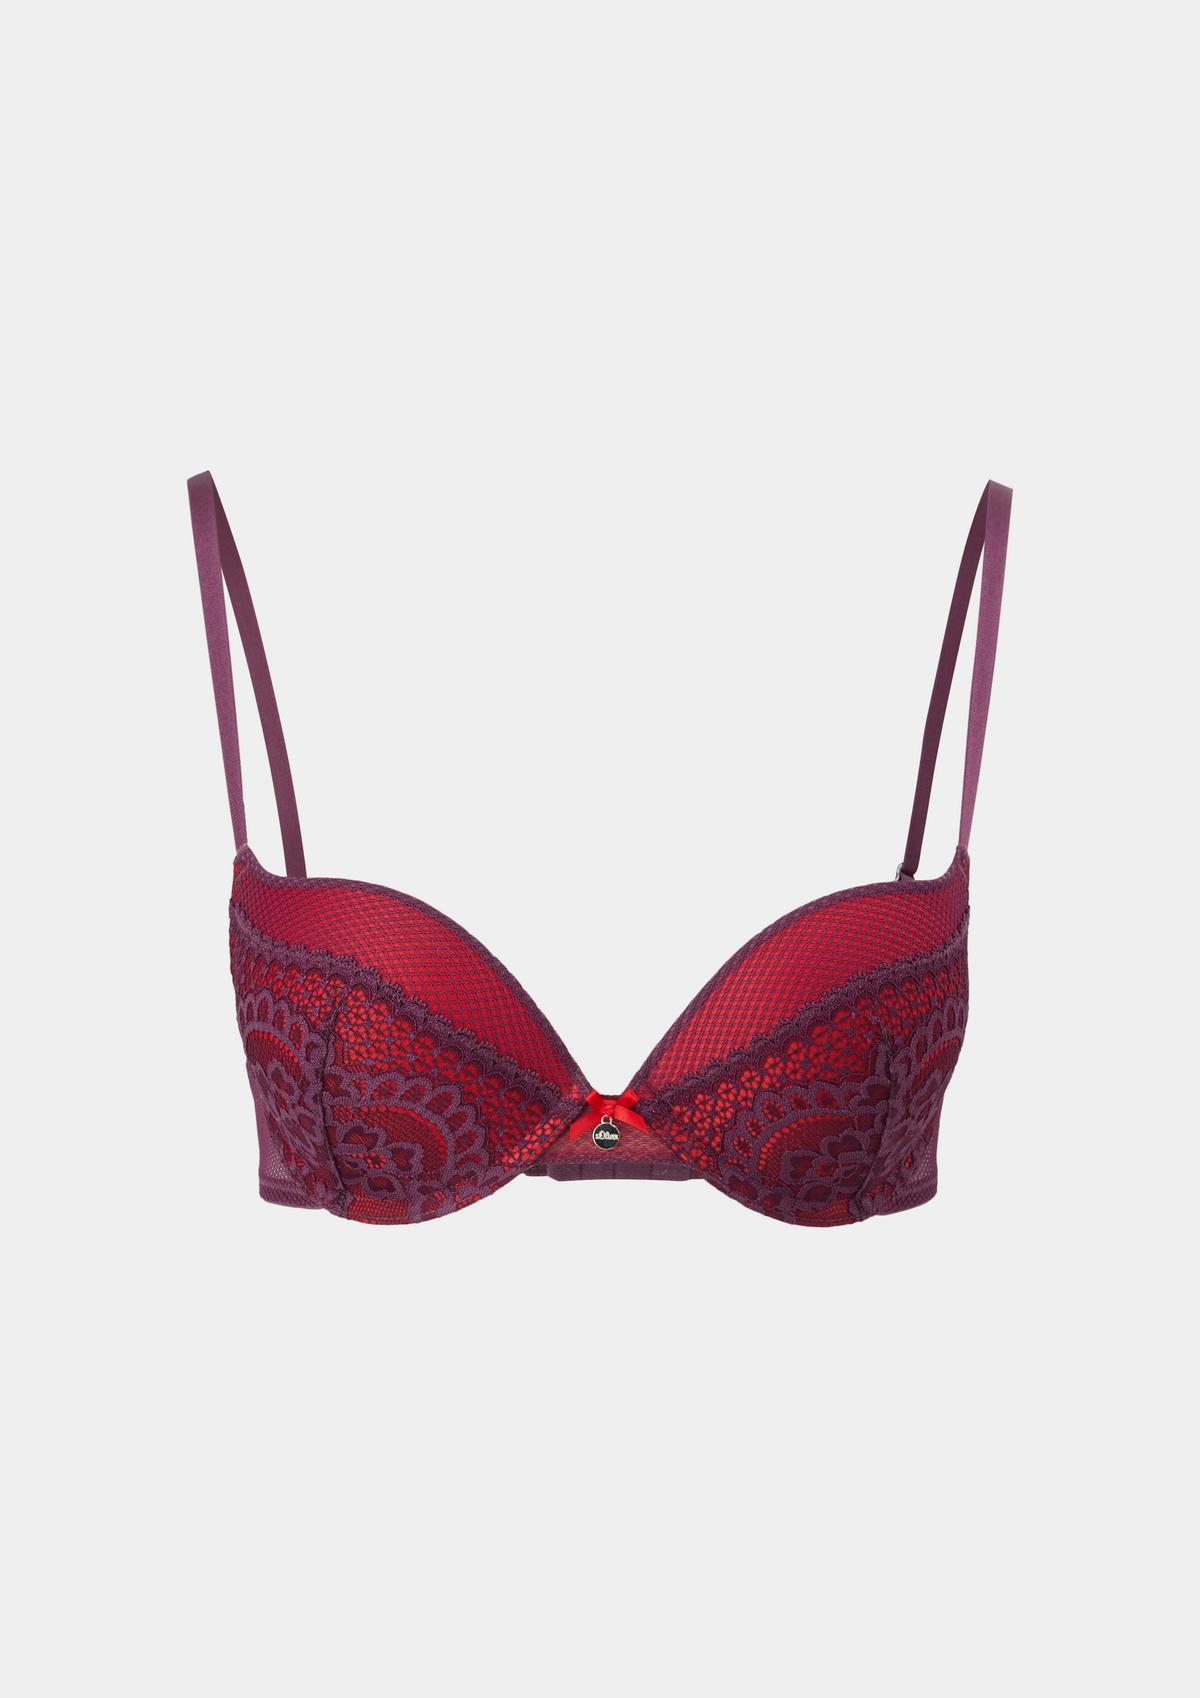 s.Oliver Push-up-bh met kant